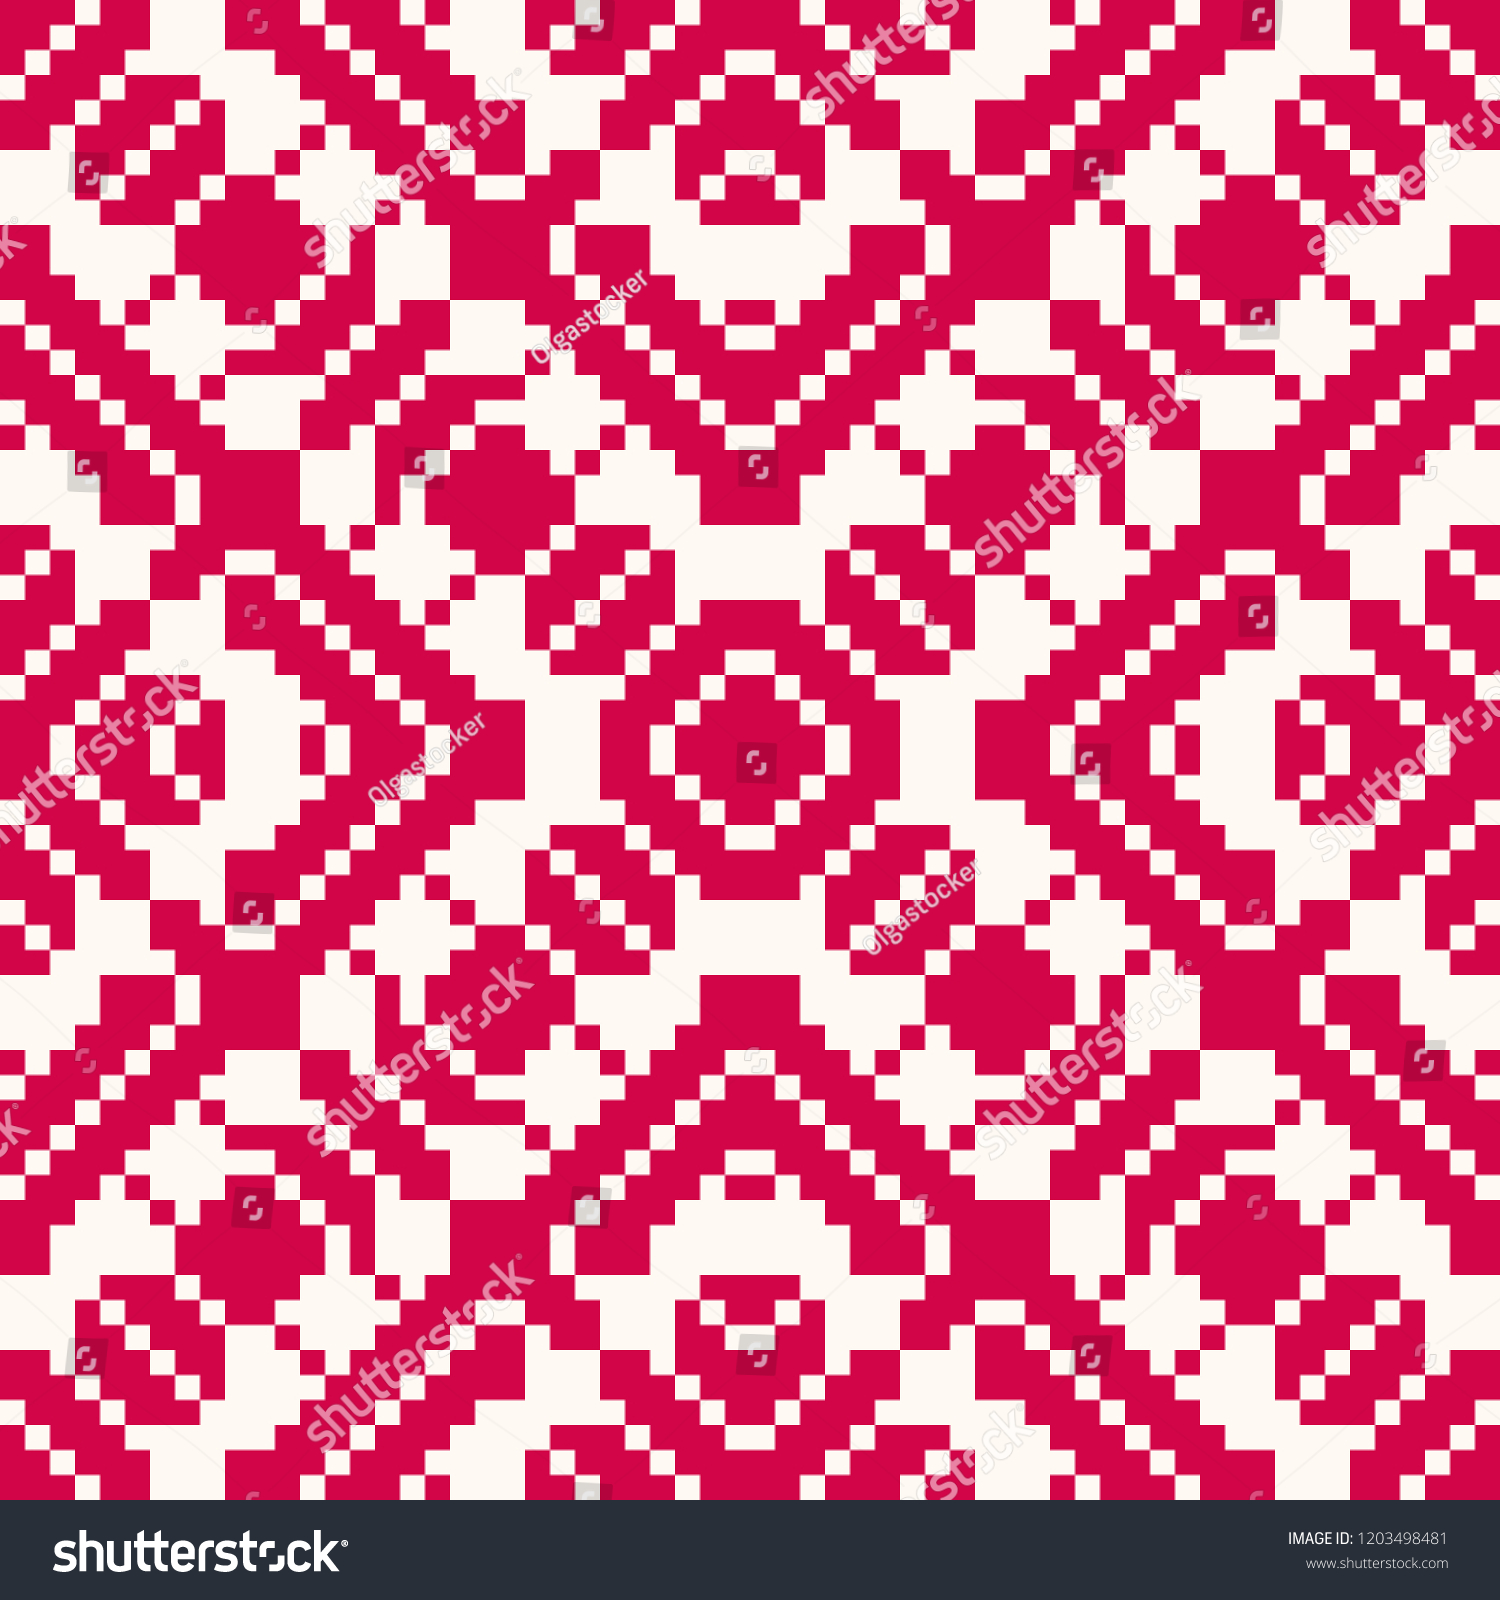 SVG of Vector geometric traditional folk ornament. Red and white seamless pattern. Ornamental background with small squares, crosses, snowflakes, flower shapes. Repeatable texture of embroidery, knitting svg